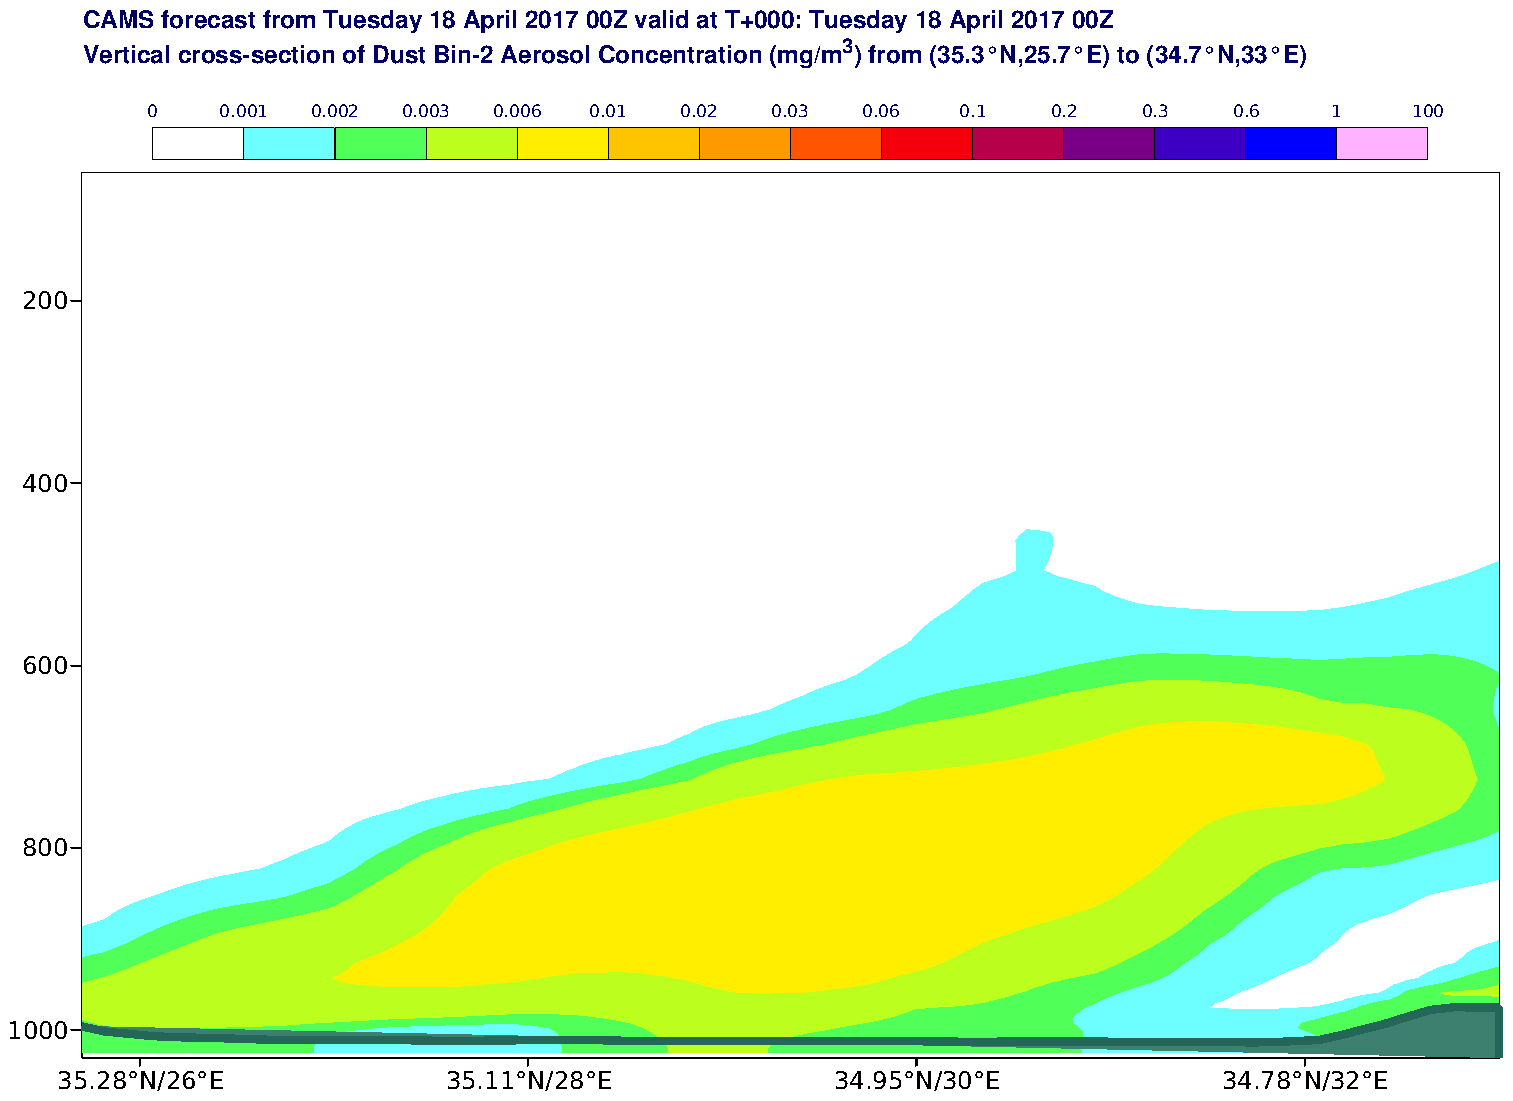 Vertical cross-section of Dust Bin-2 Aerosol Concentration (mg/m3) valid at T0 - 2017-04-18 00:00